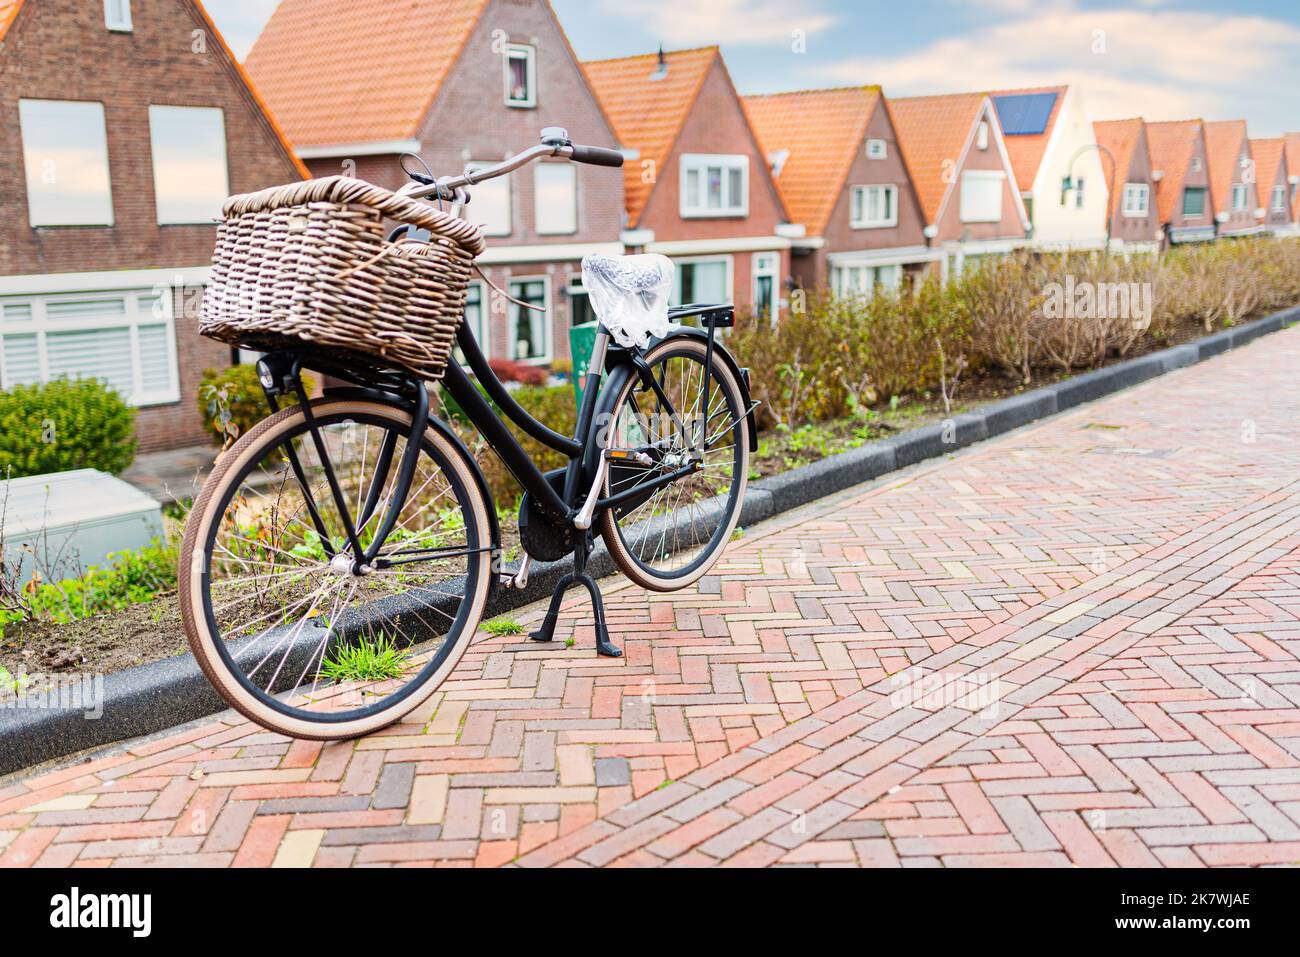 bicycle with handlebar pannier parked at curb in dutch village Stock Photo